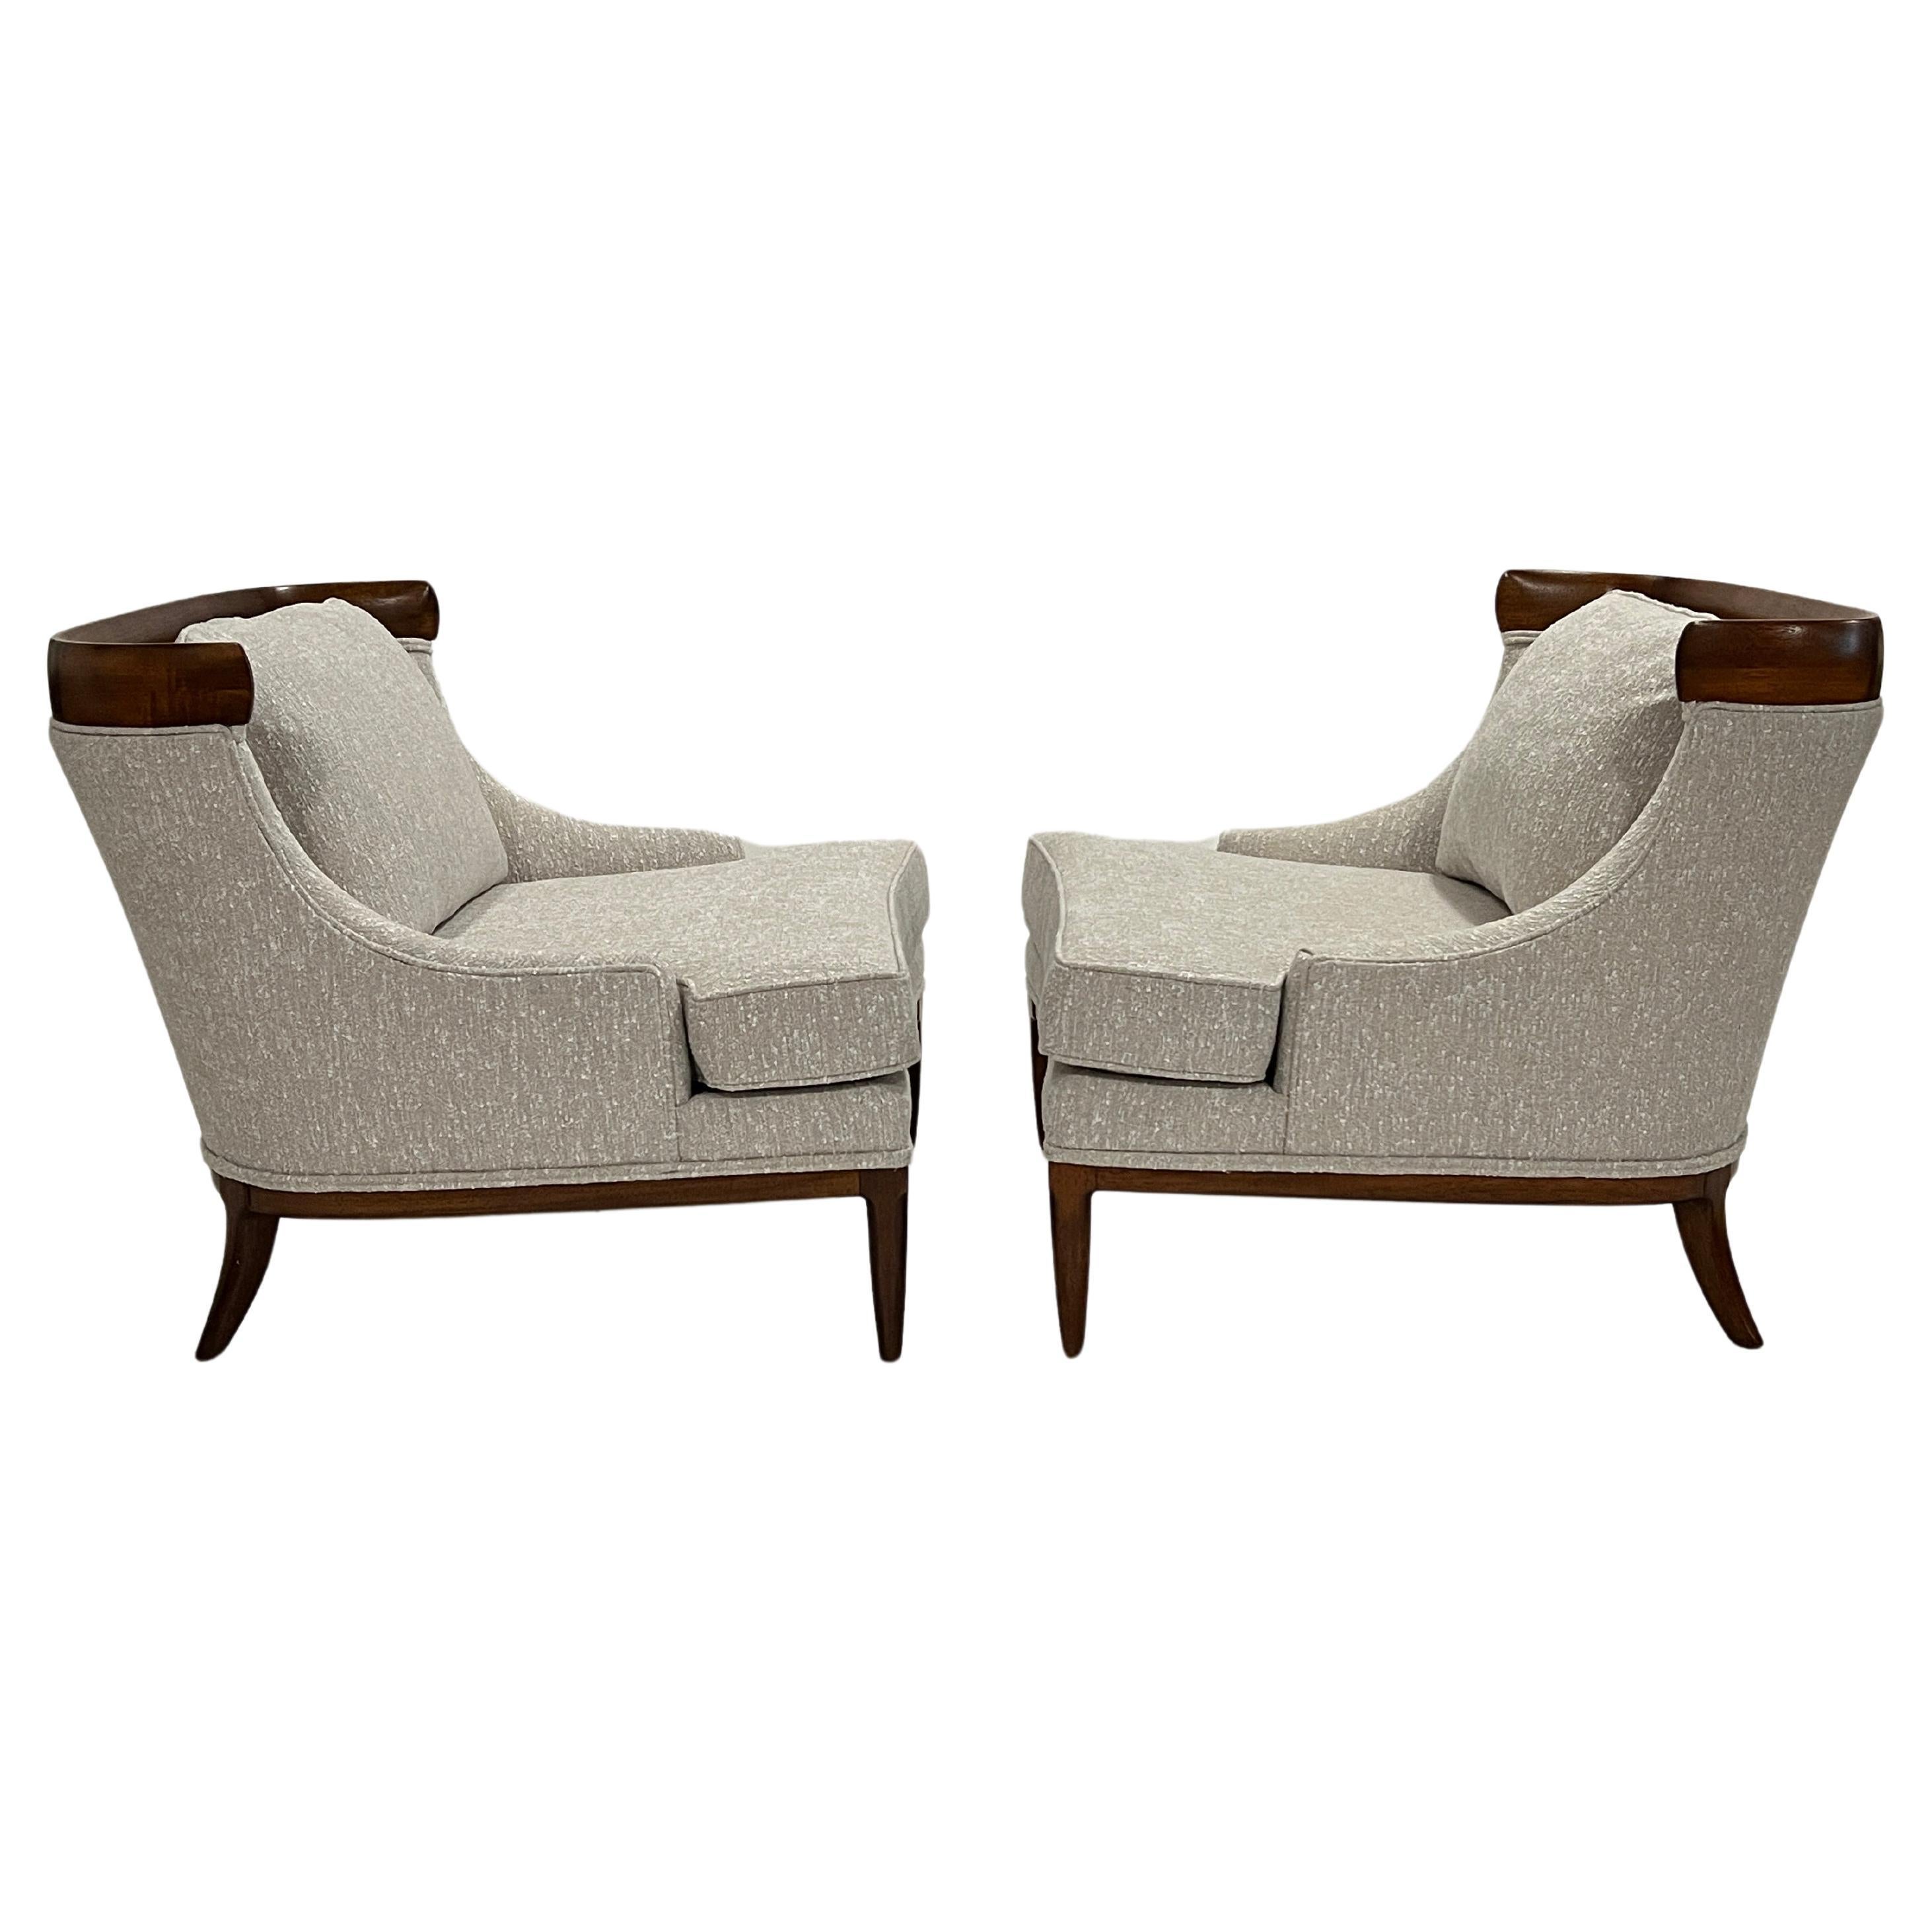 Tomlinson Sophisticate Lounge Chairs by Erwin Lambeth